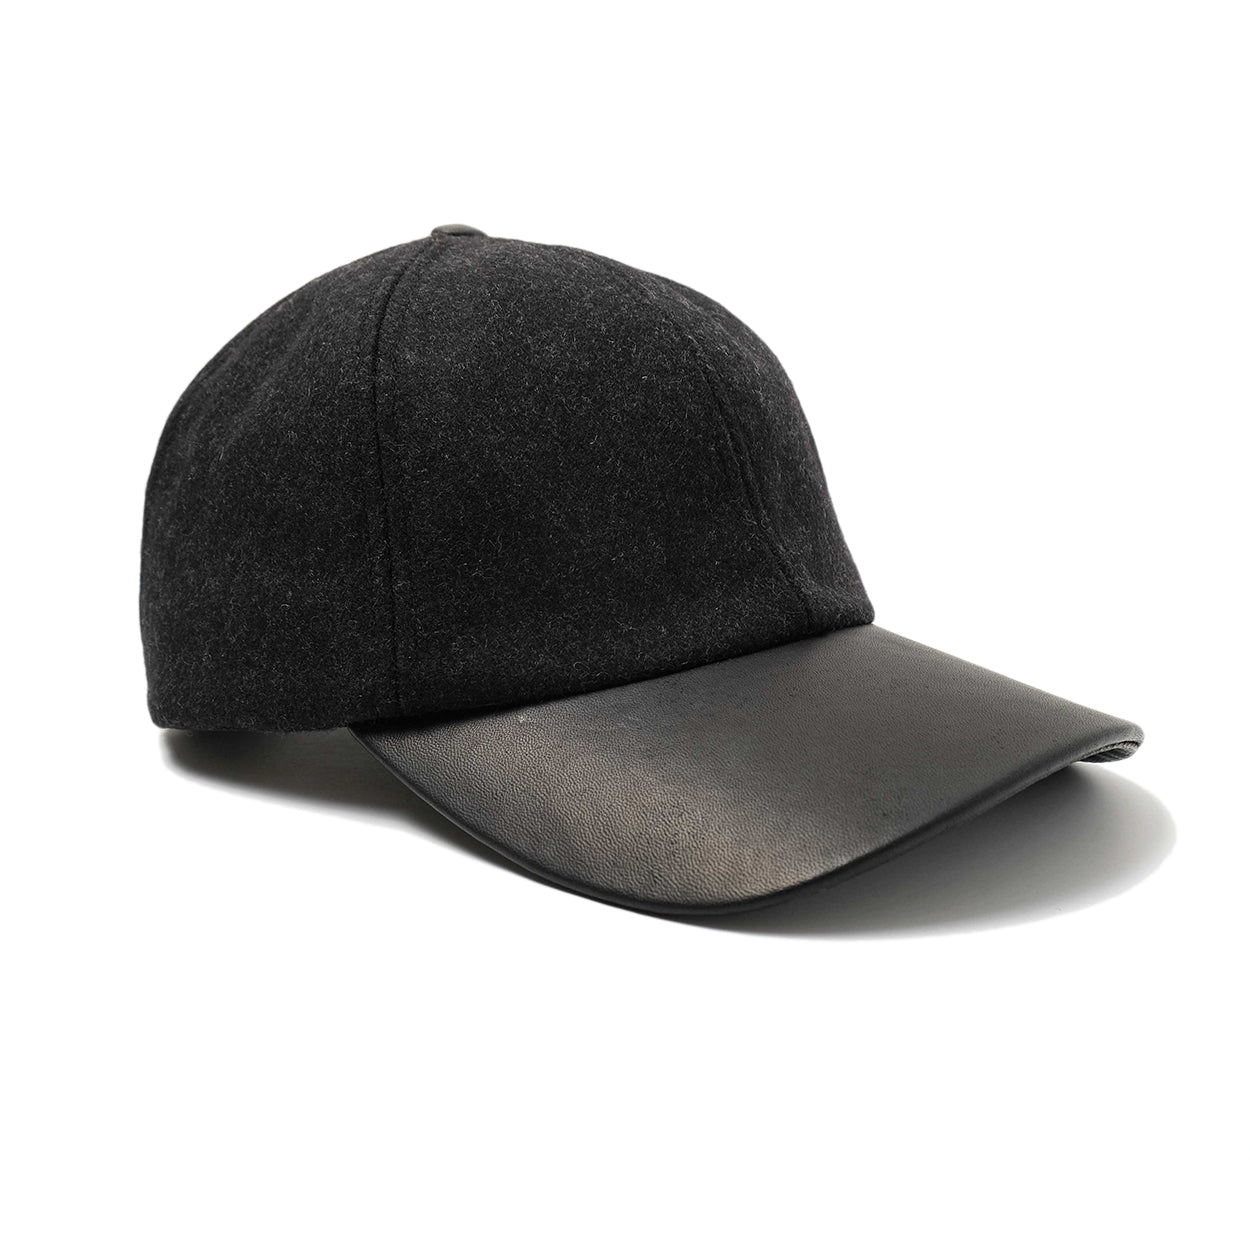 Charcoal Wool/Leather Ball Cap